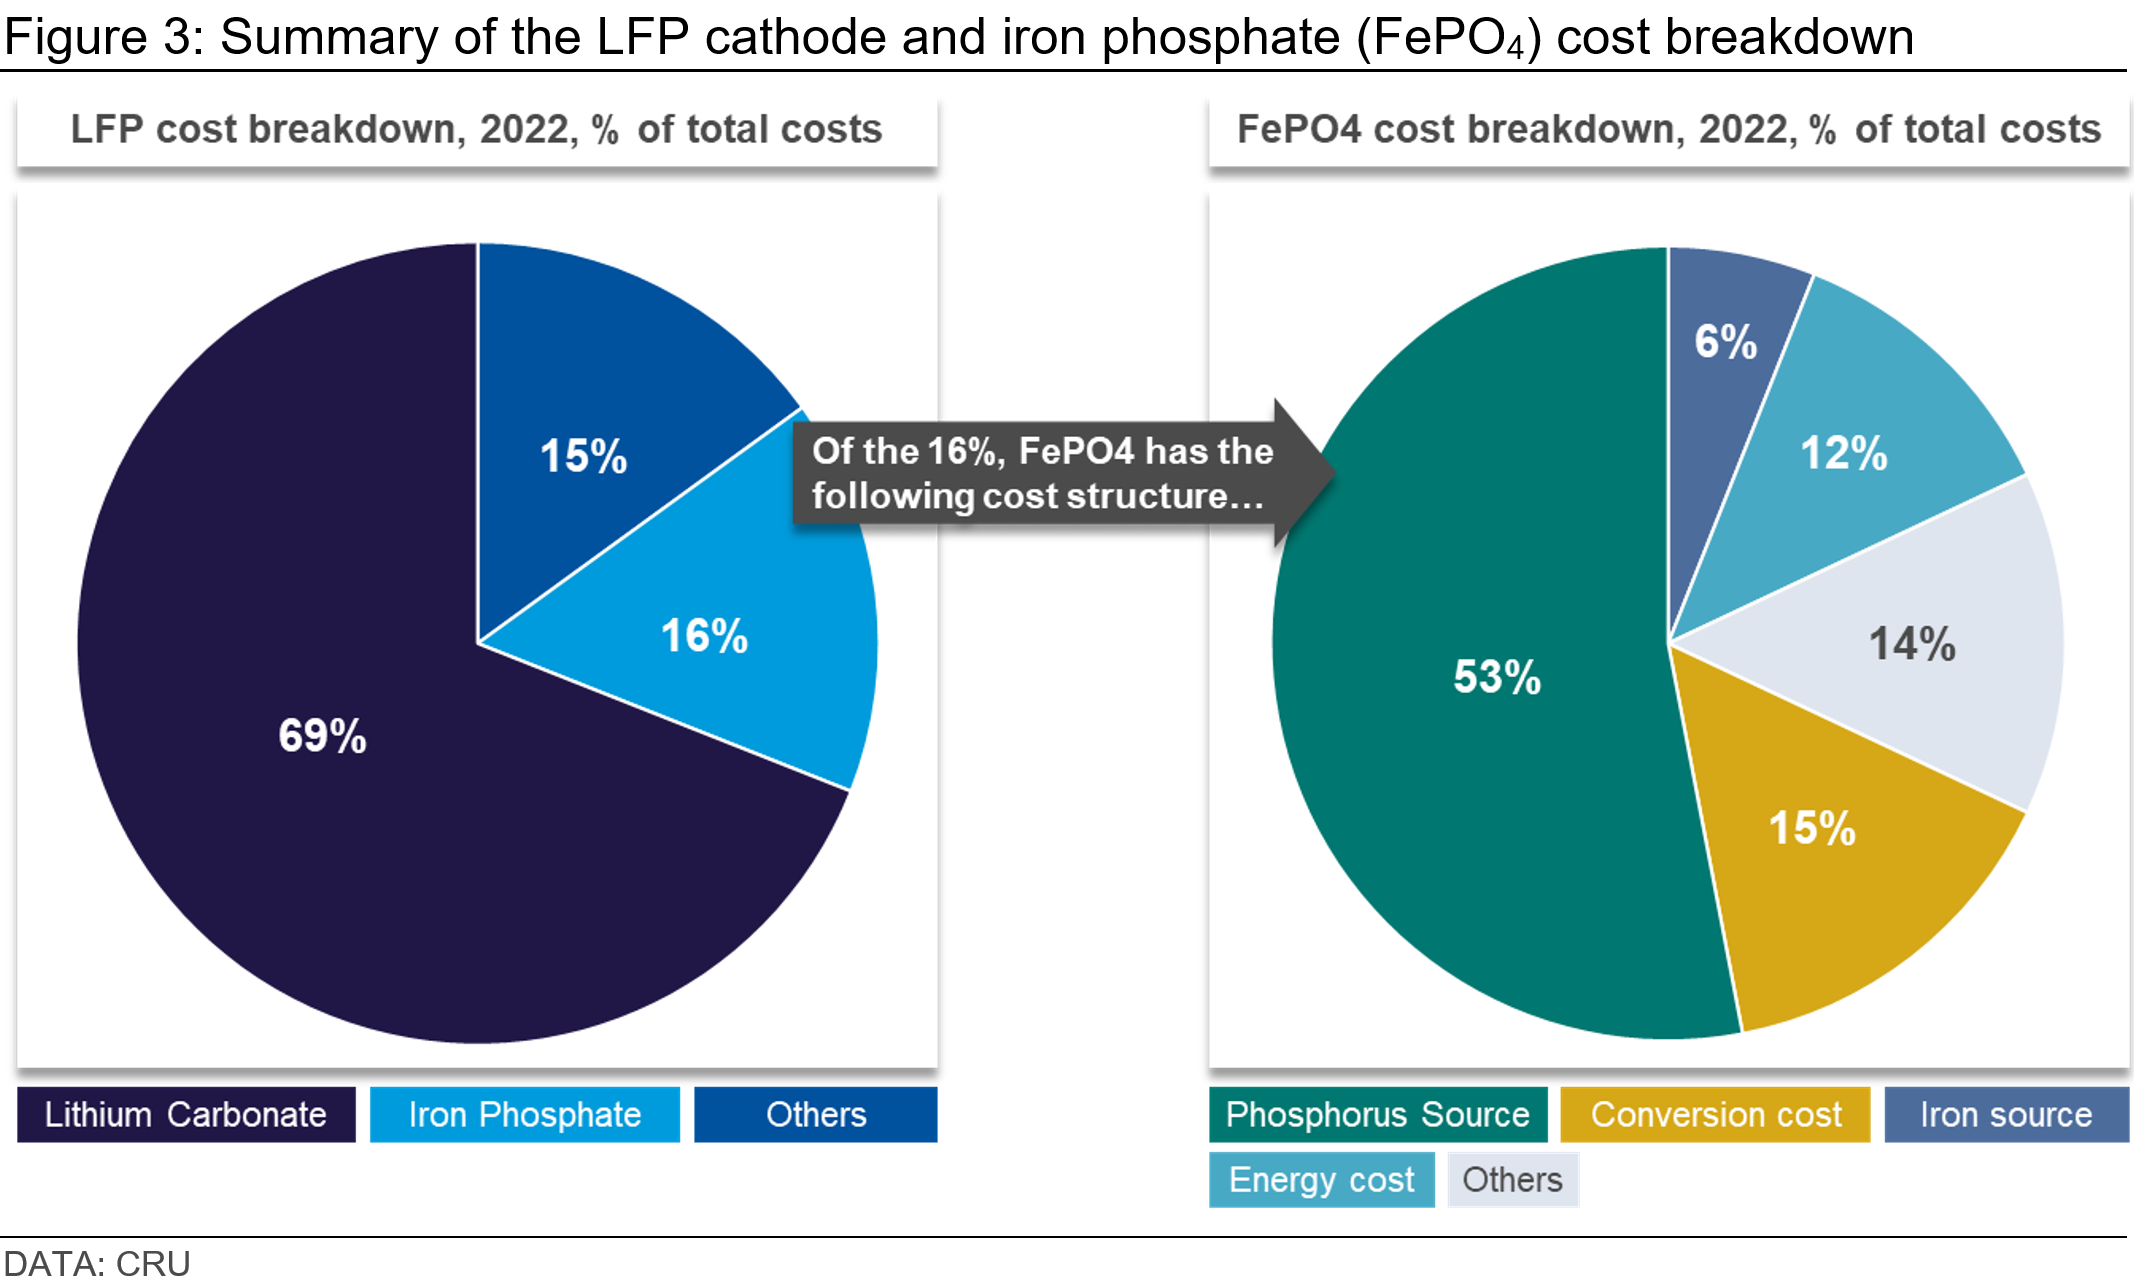 Graphs showing the summary of the LFP cathode and iron phosphate (FePO4) cost breakdown